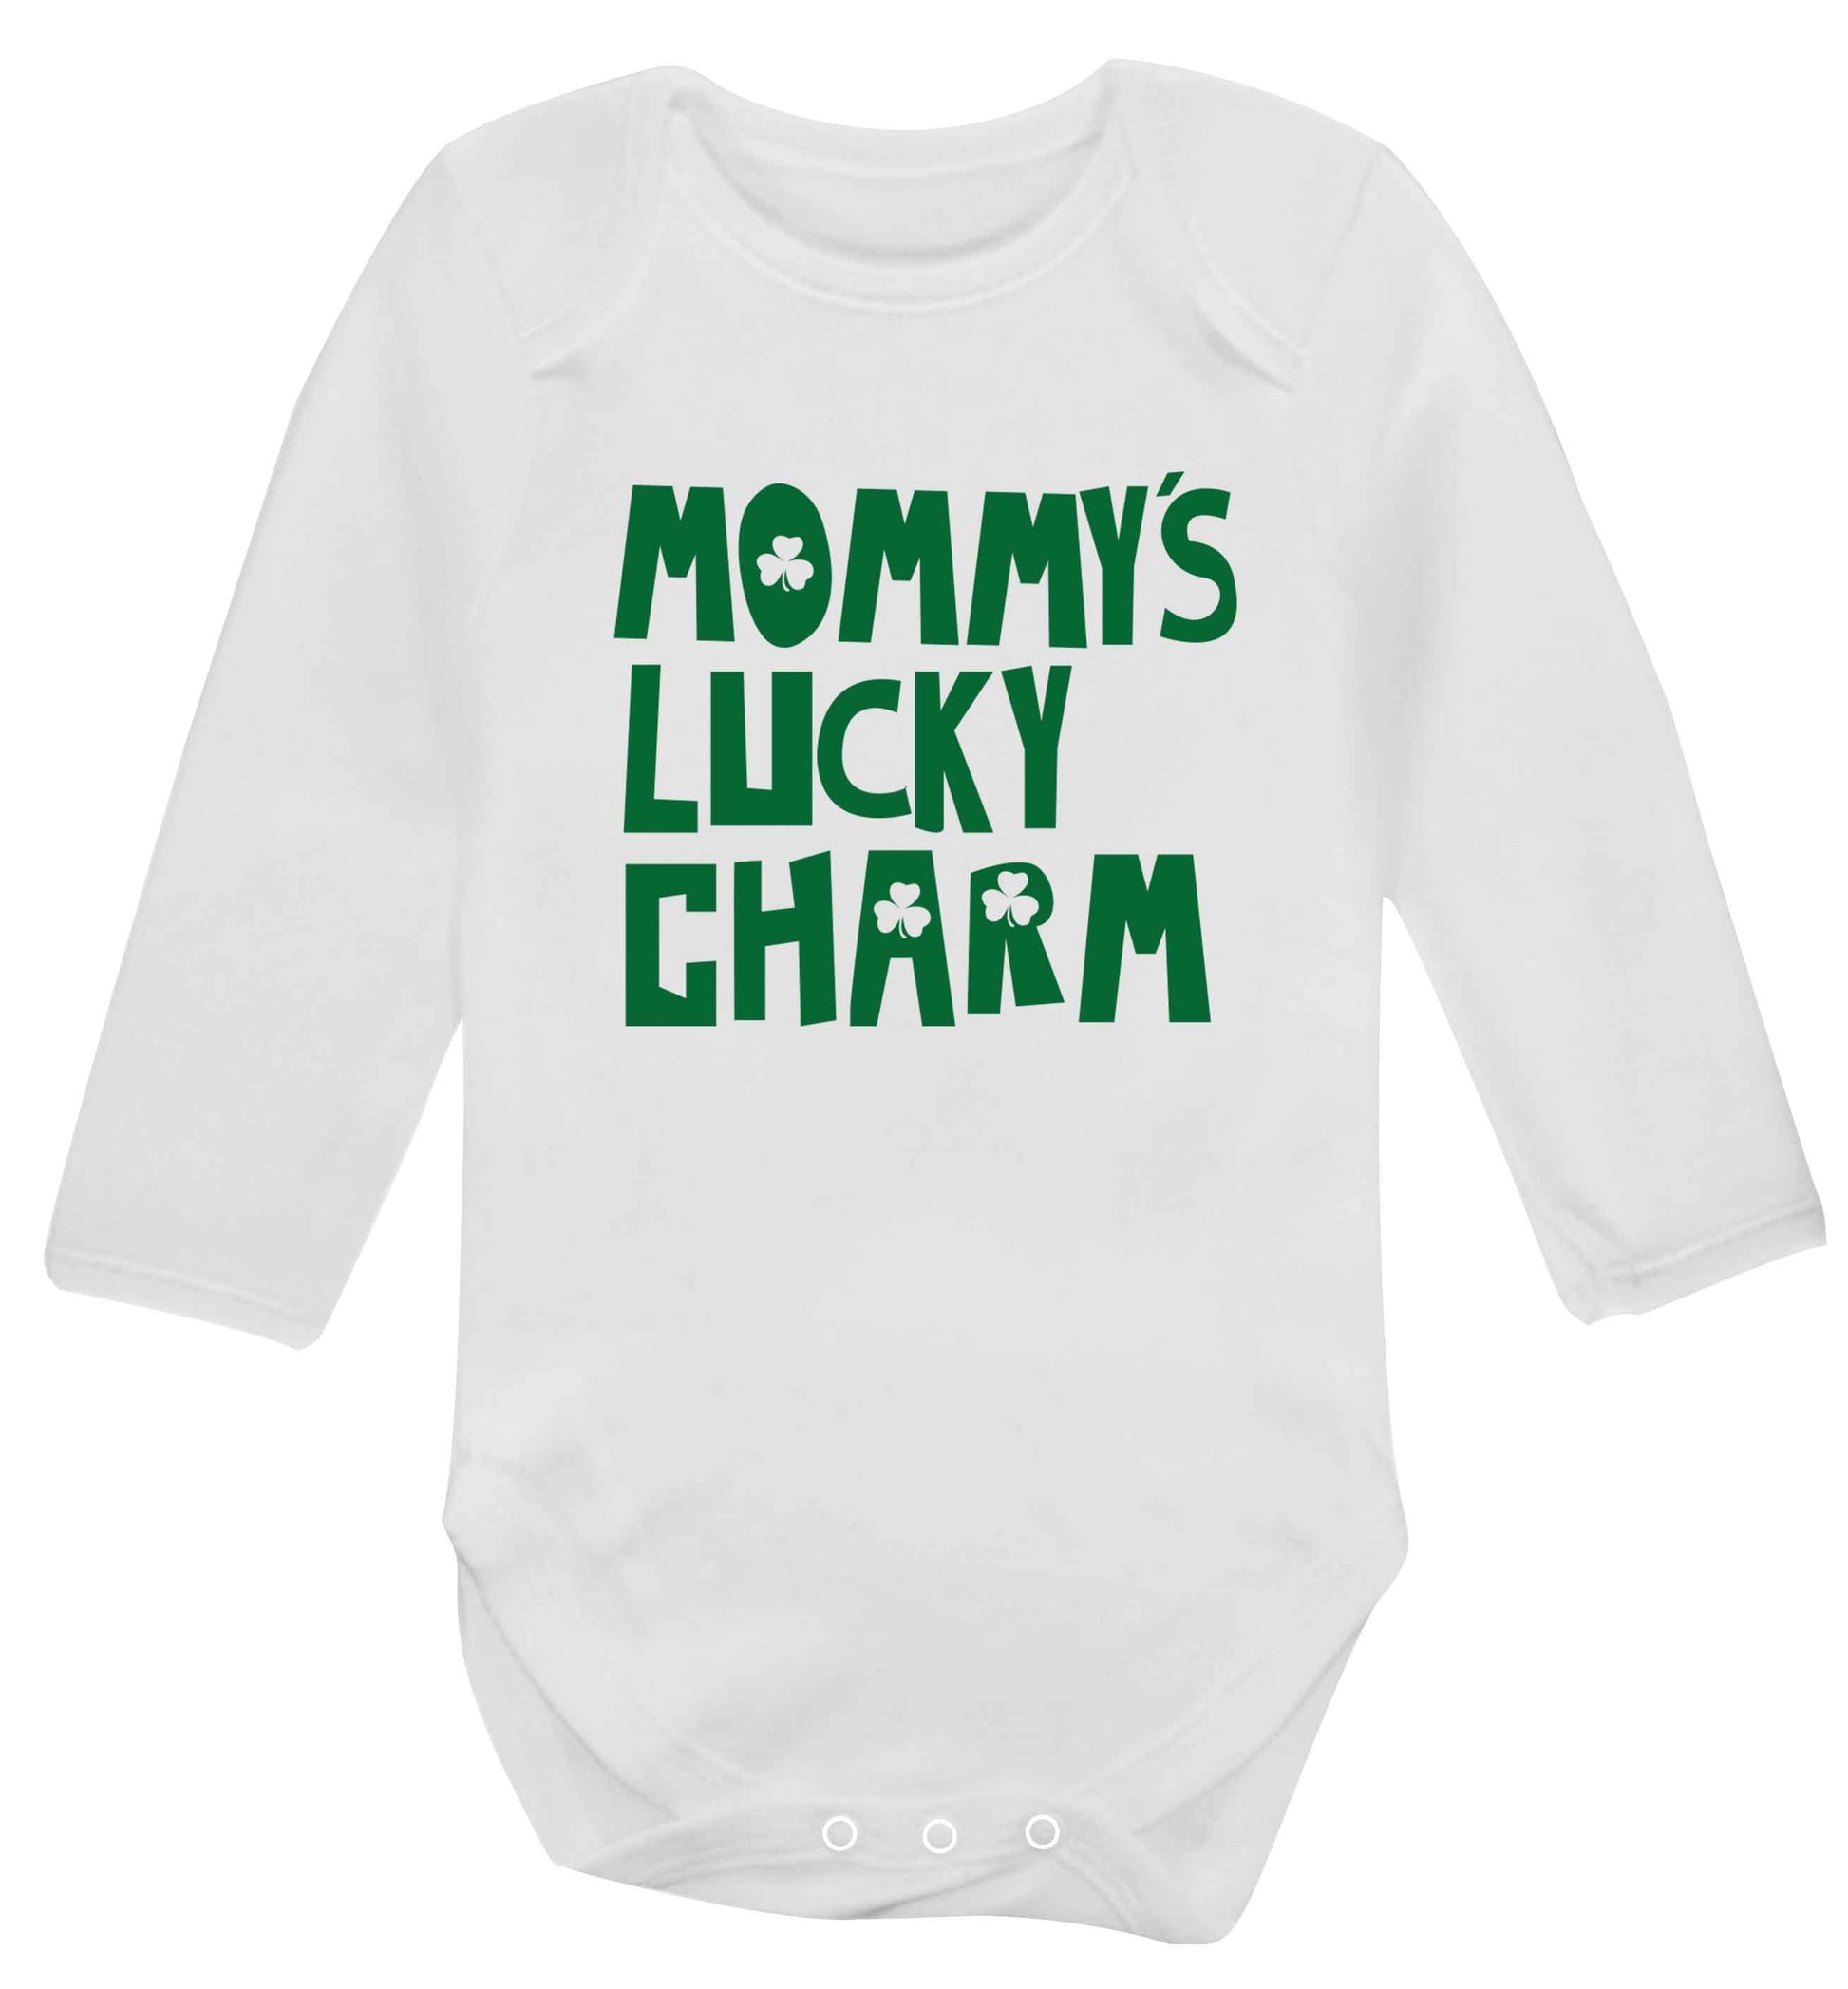 Mommy's lucky charm baby vest long sleeved white 6-12 months